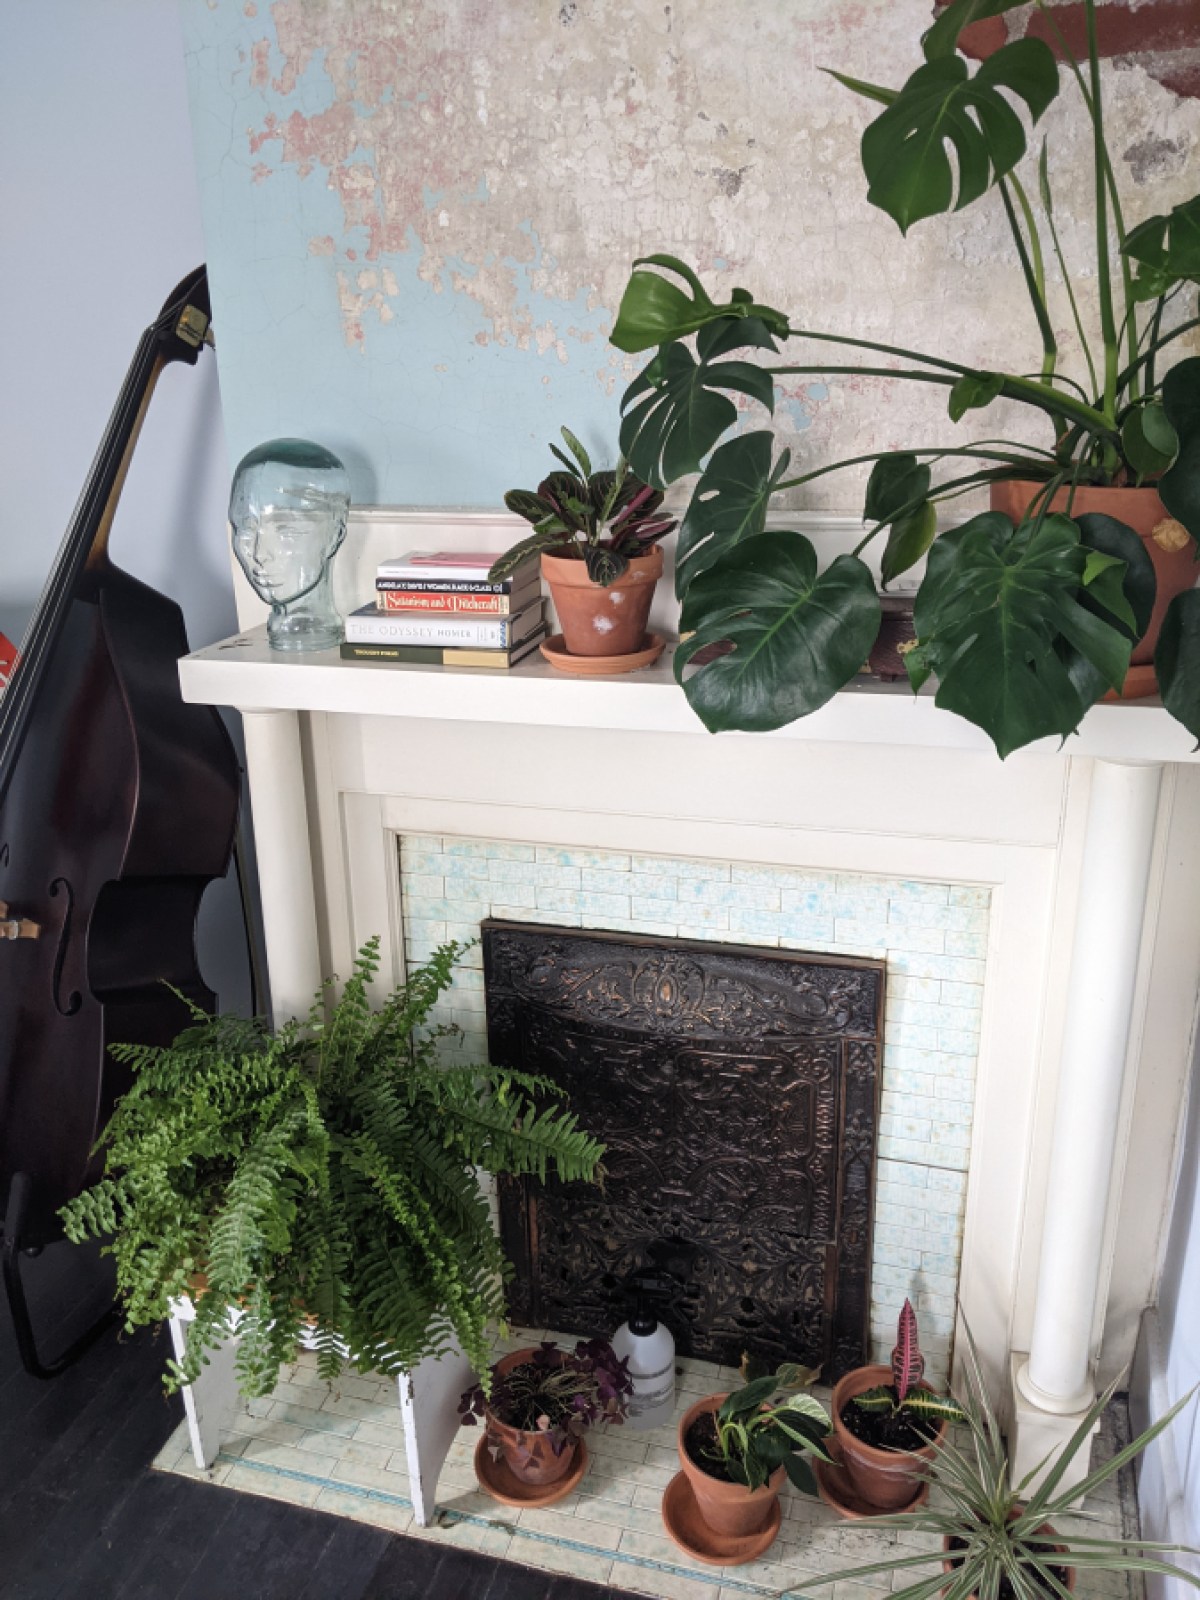 Restored fireplace with plants and books on the mantle